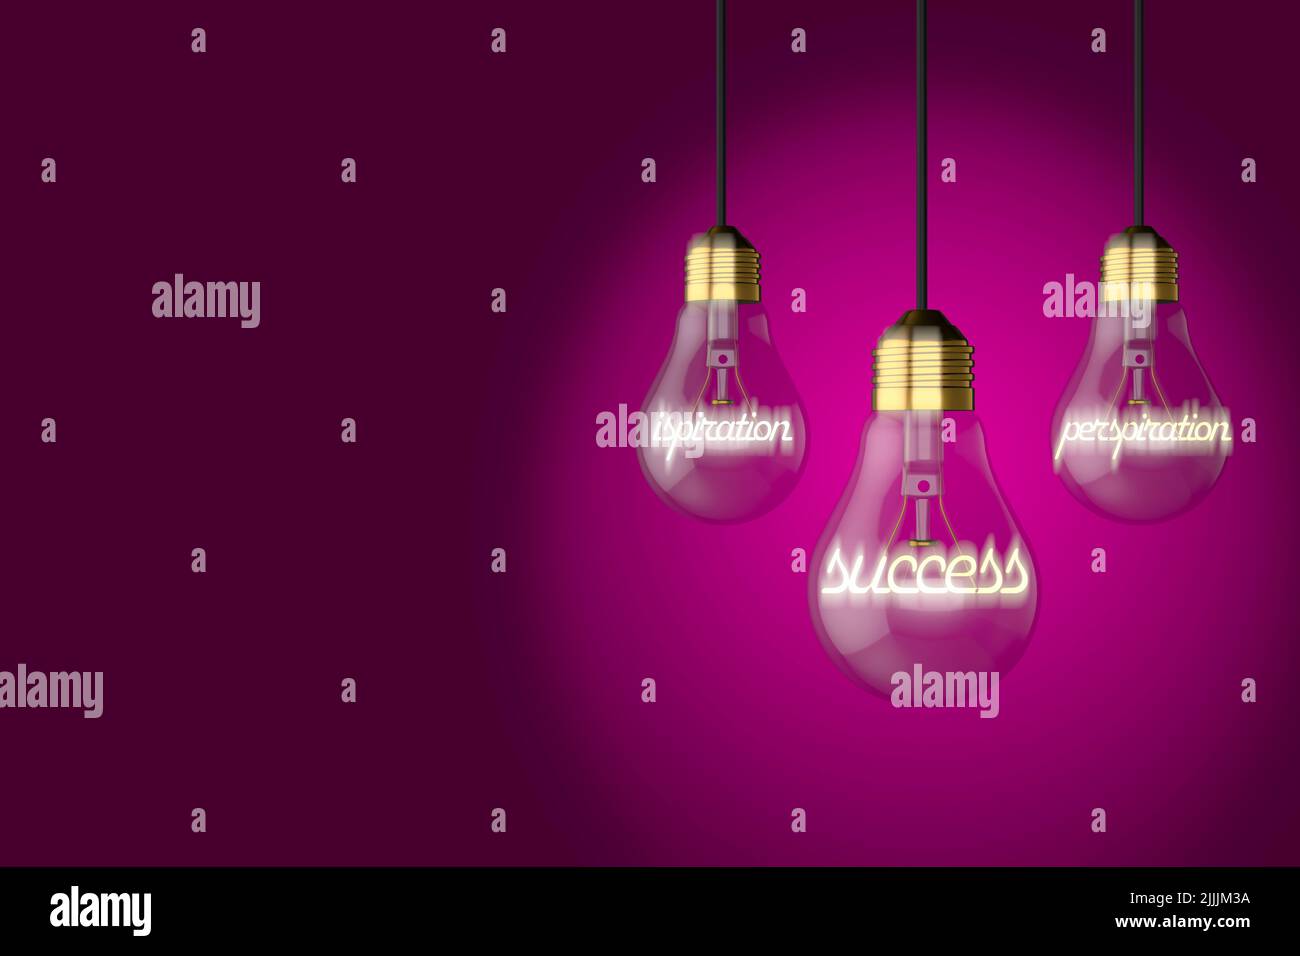 old style light bulbs lightbulbs illustrating inspiration perspiration success concept on a colourful colorful cerice pink background Stock Photo